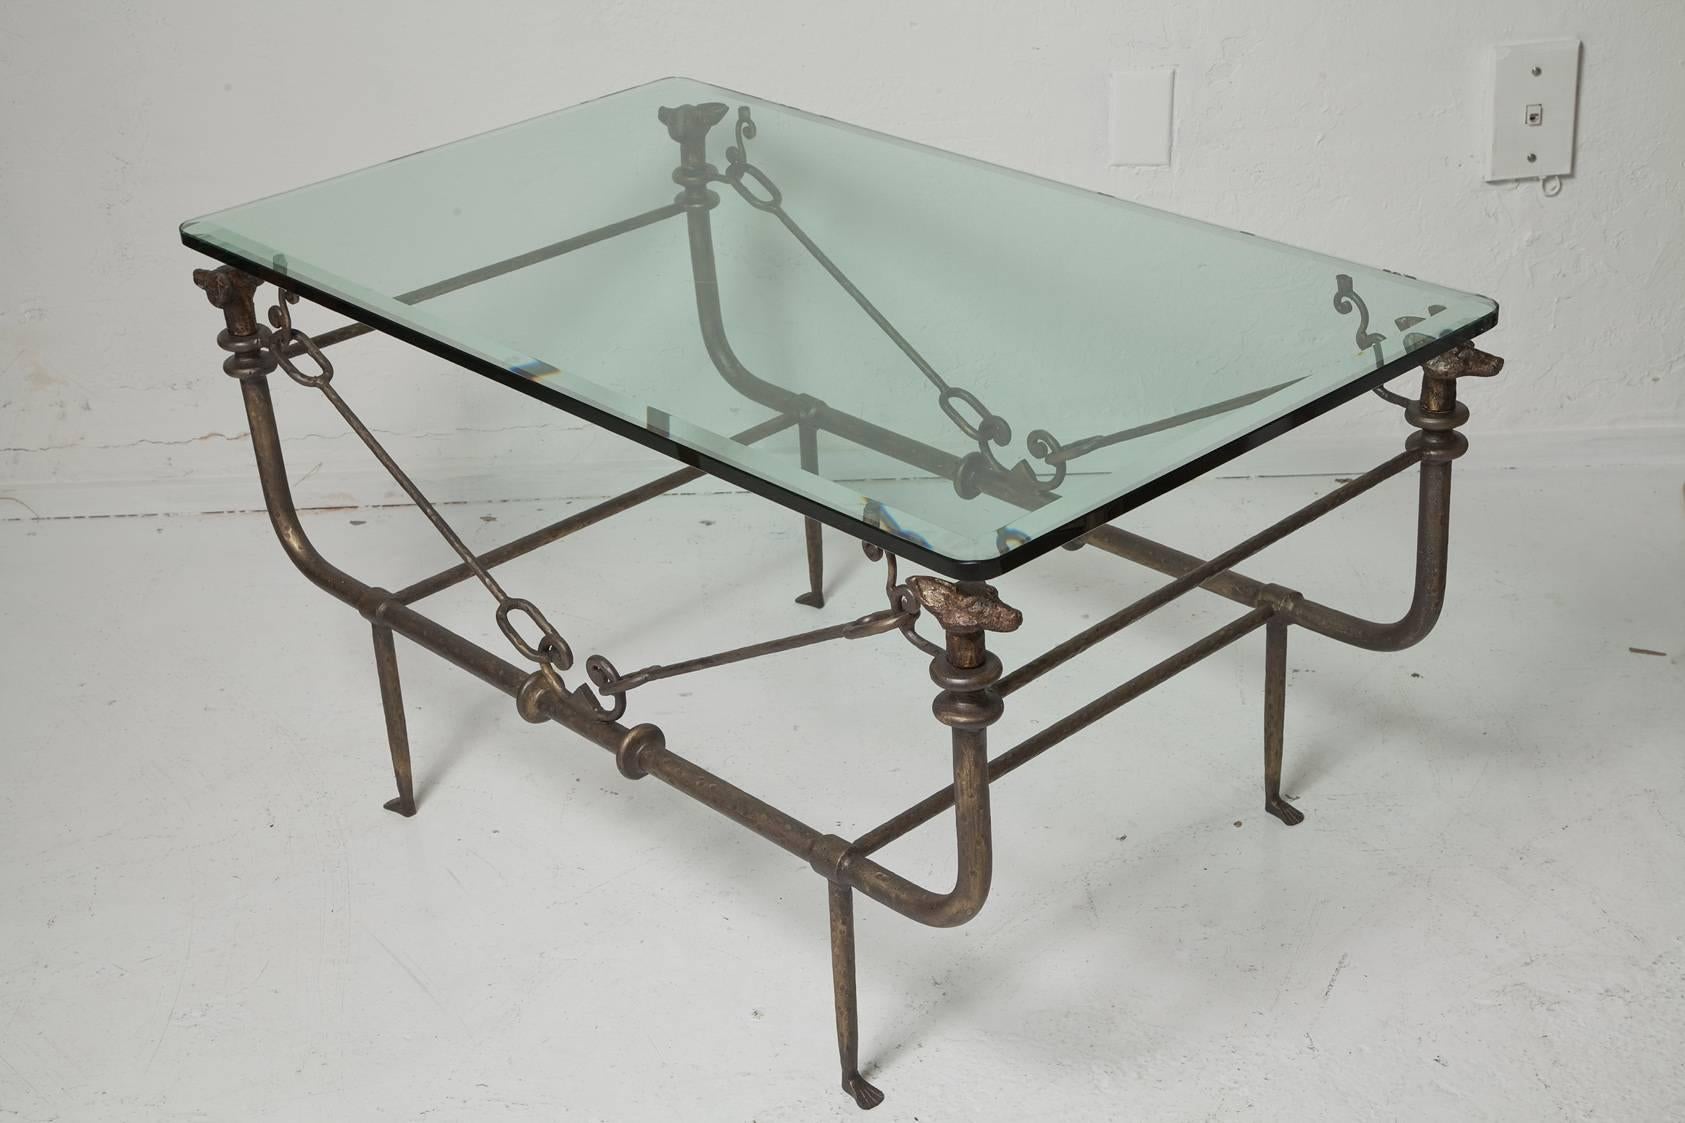 Unique Giacometti-style iron coffee table in patinated bronze finish with 0.5 in. beveled glass top supported by whimsical foxes at each of its corners, circa 1970.